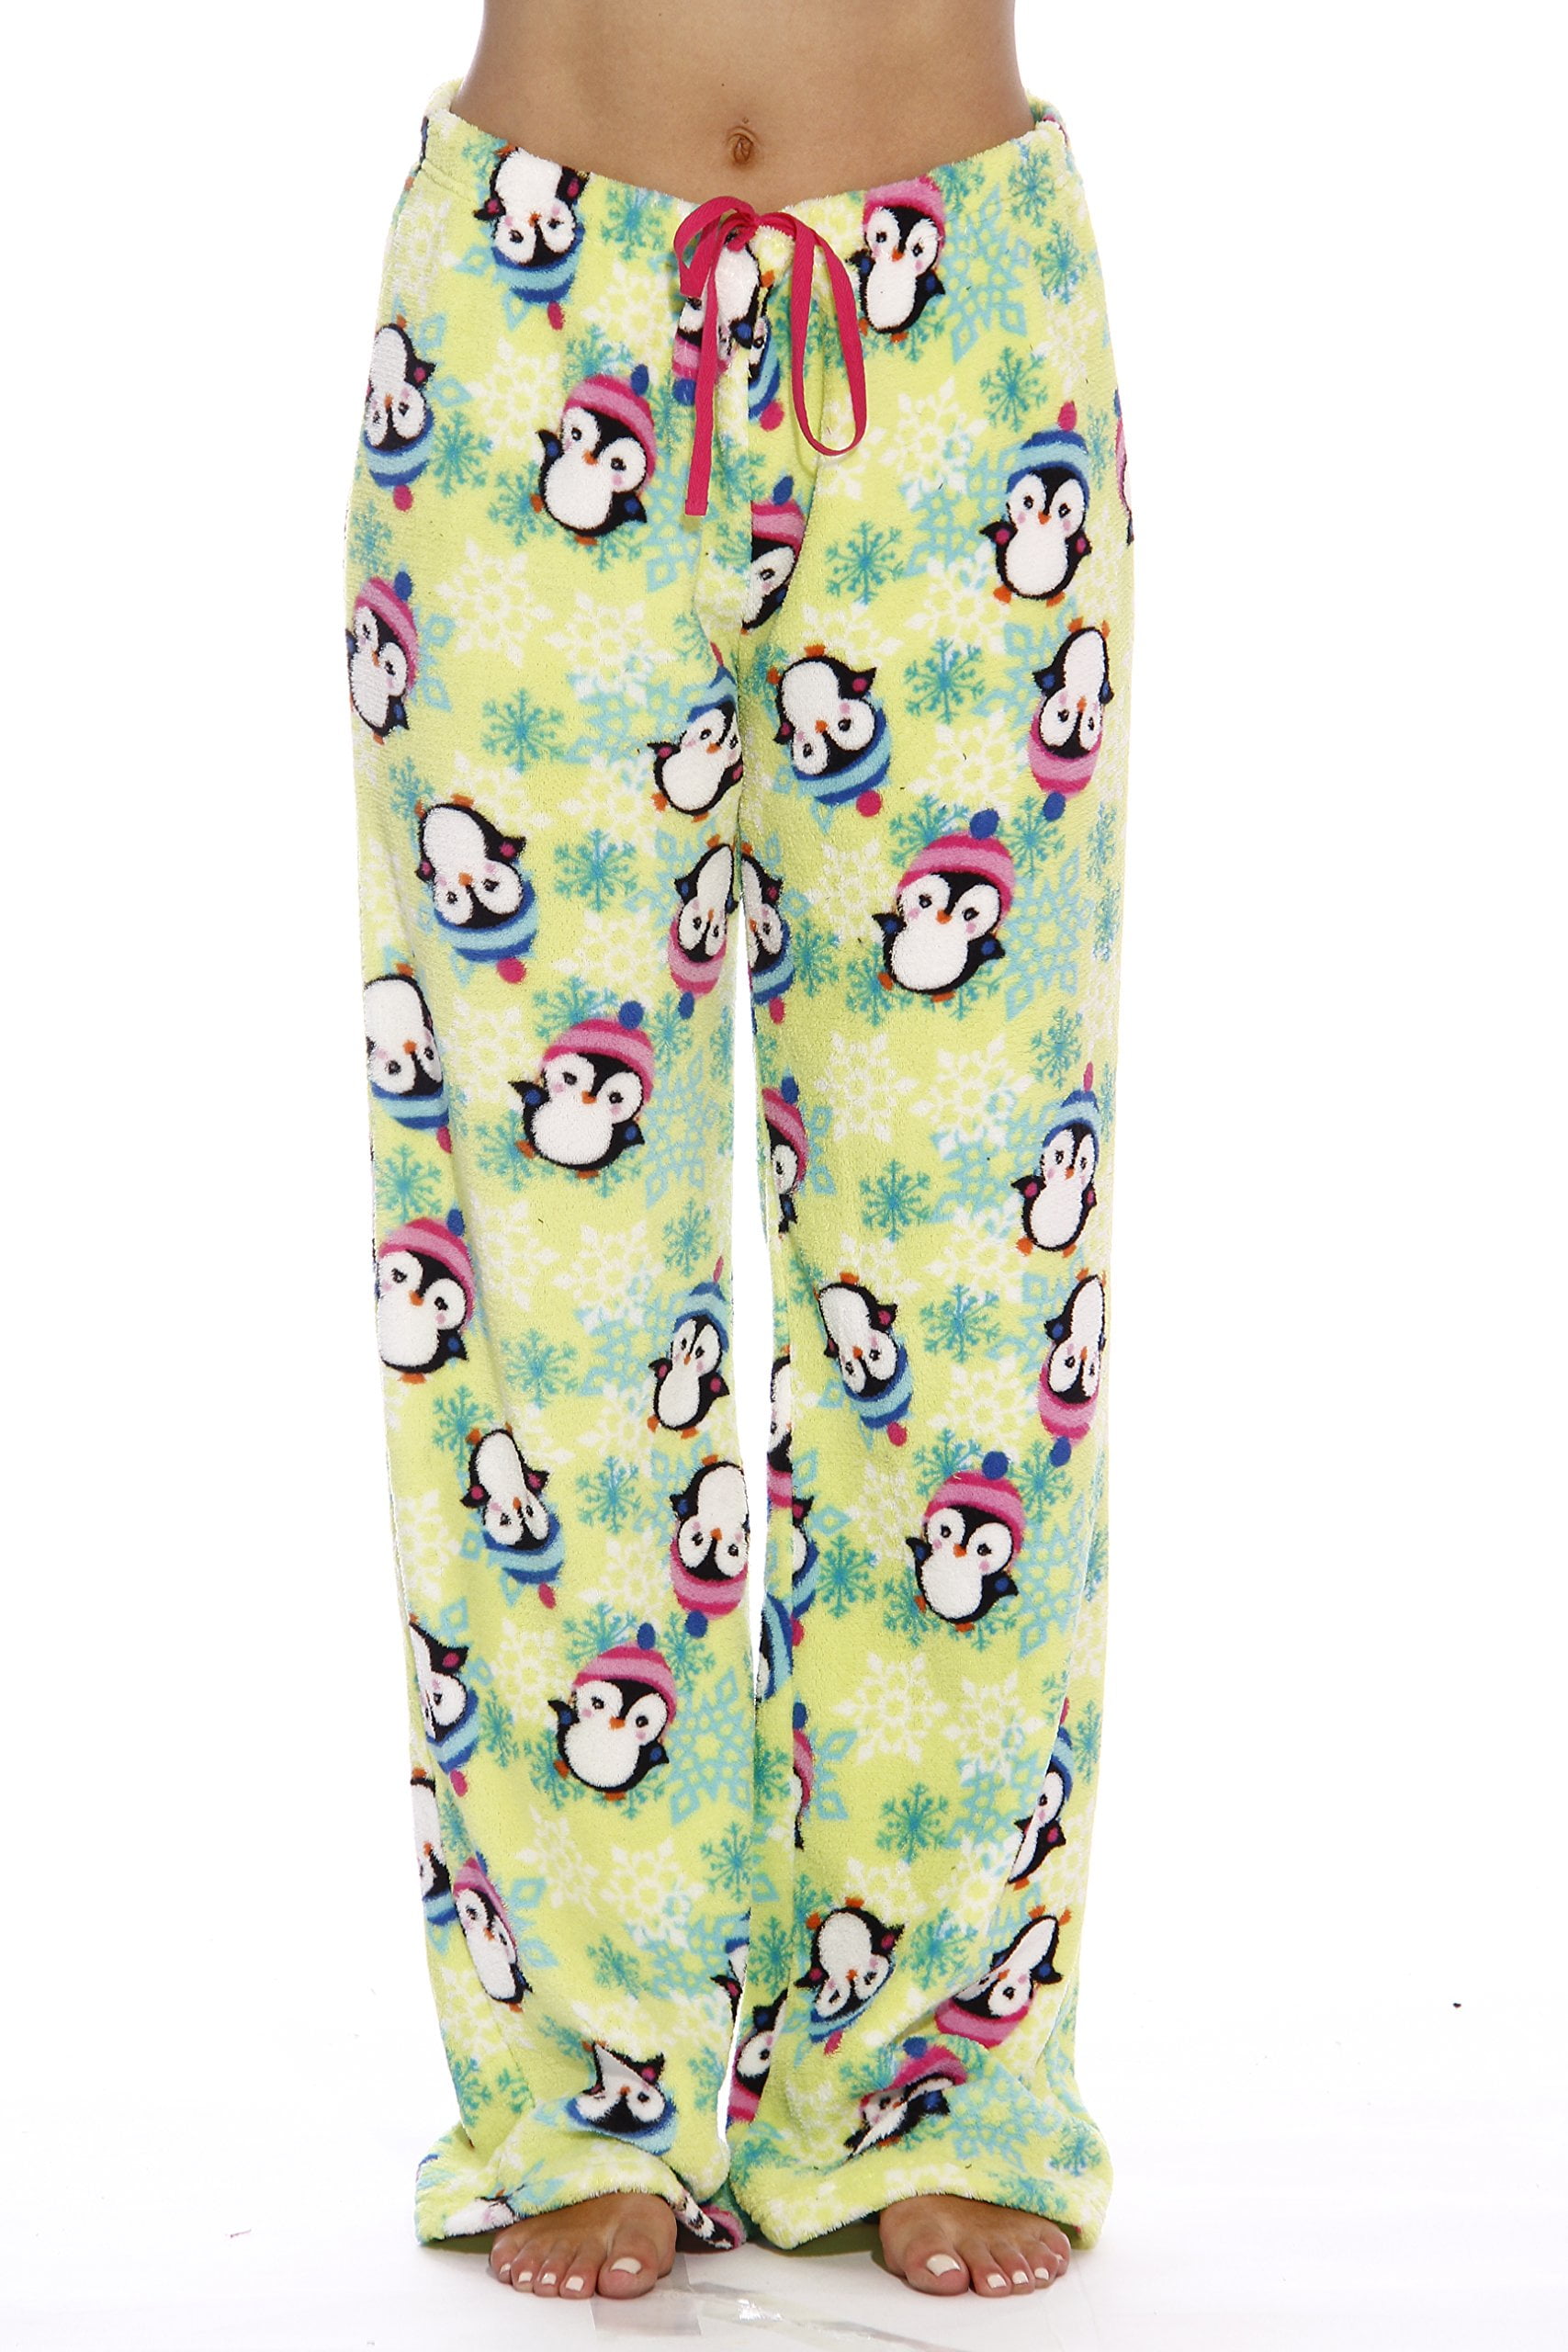 Just Love Women's Plush Pajama Pants - Soft and Cozy Lounge Pants in Petite  to Plus Sizes (Snowy Penguin, Small) 